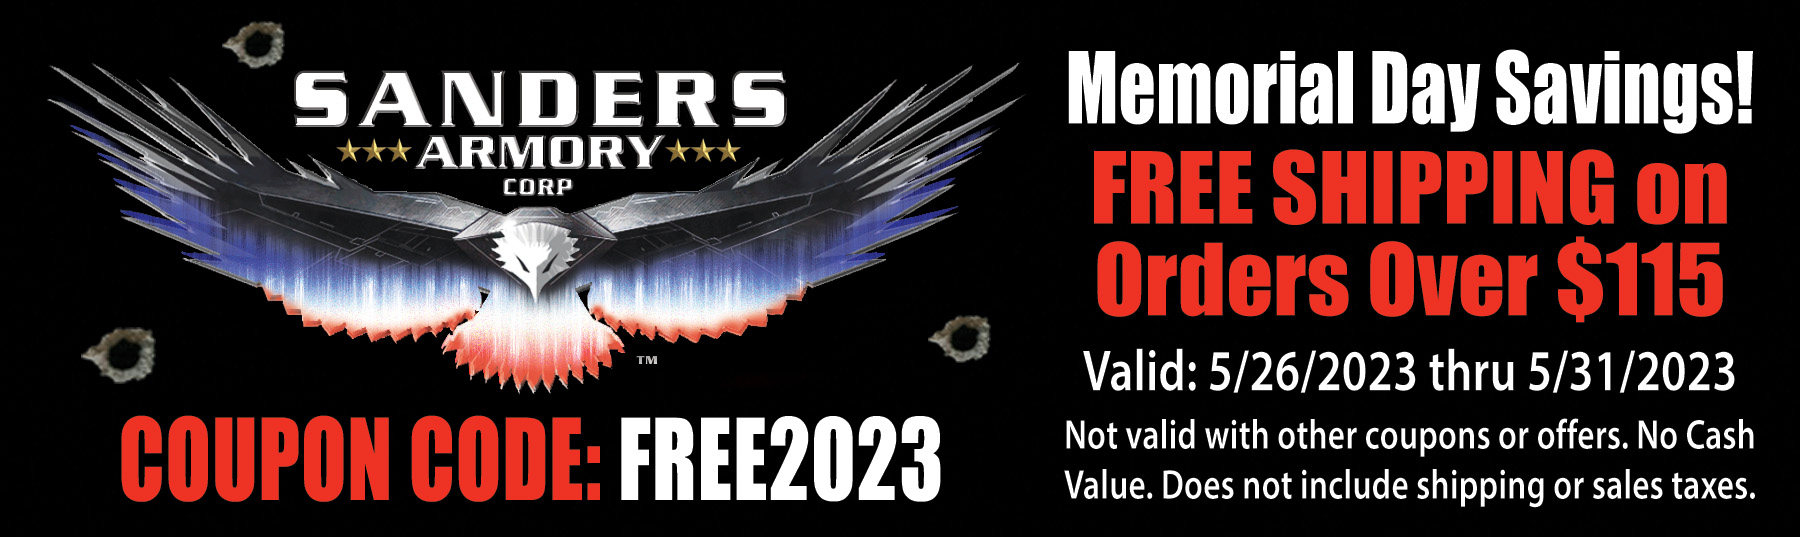 Sanders Armory Memorial Day Free Shipping Coupon Code Free2023 for orders over $115